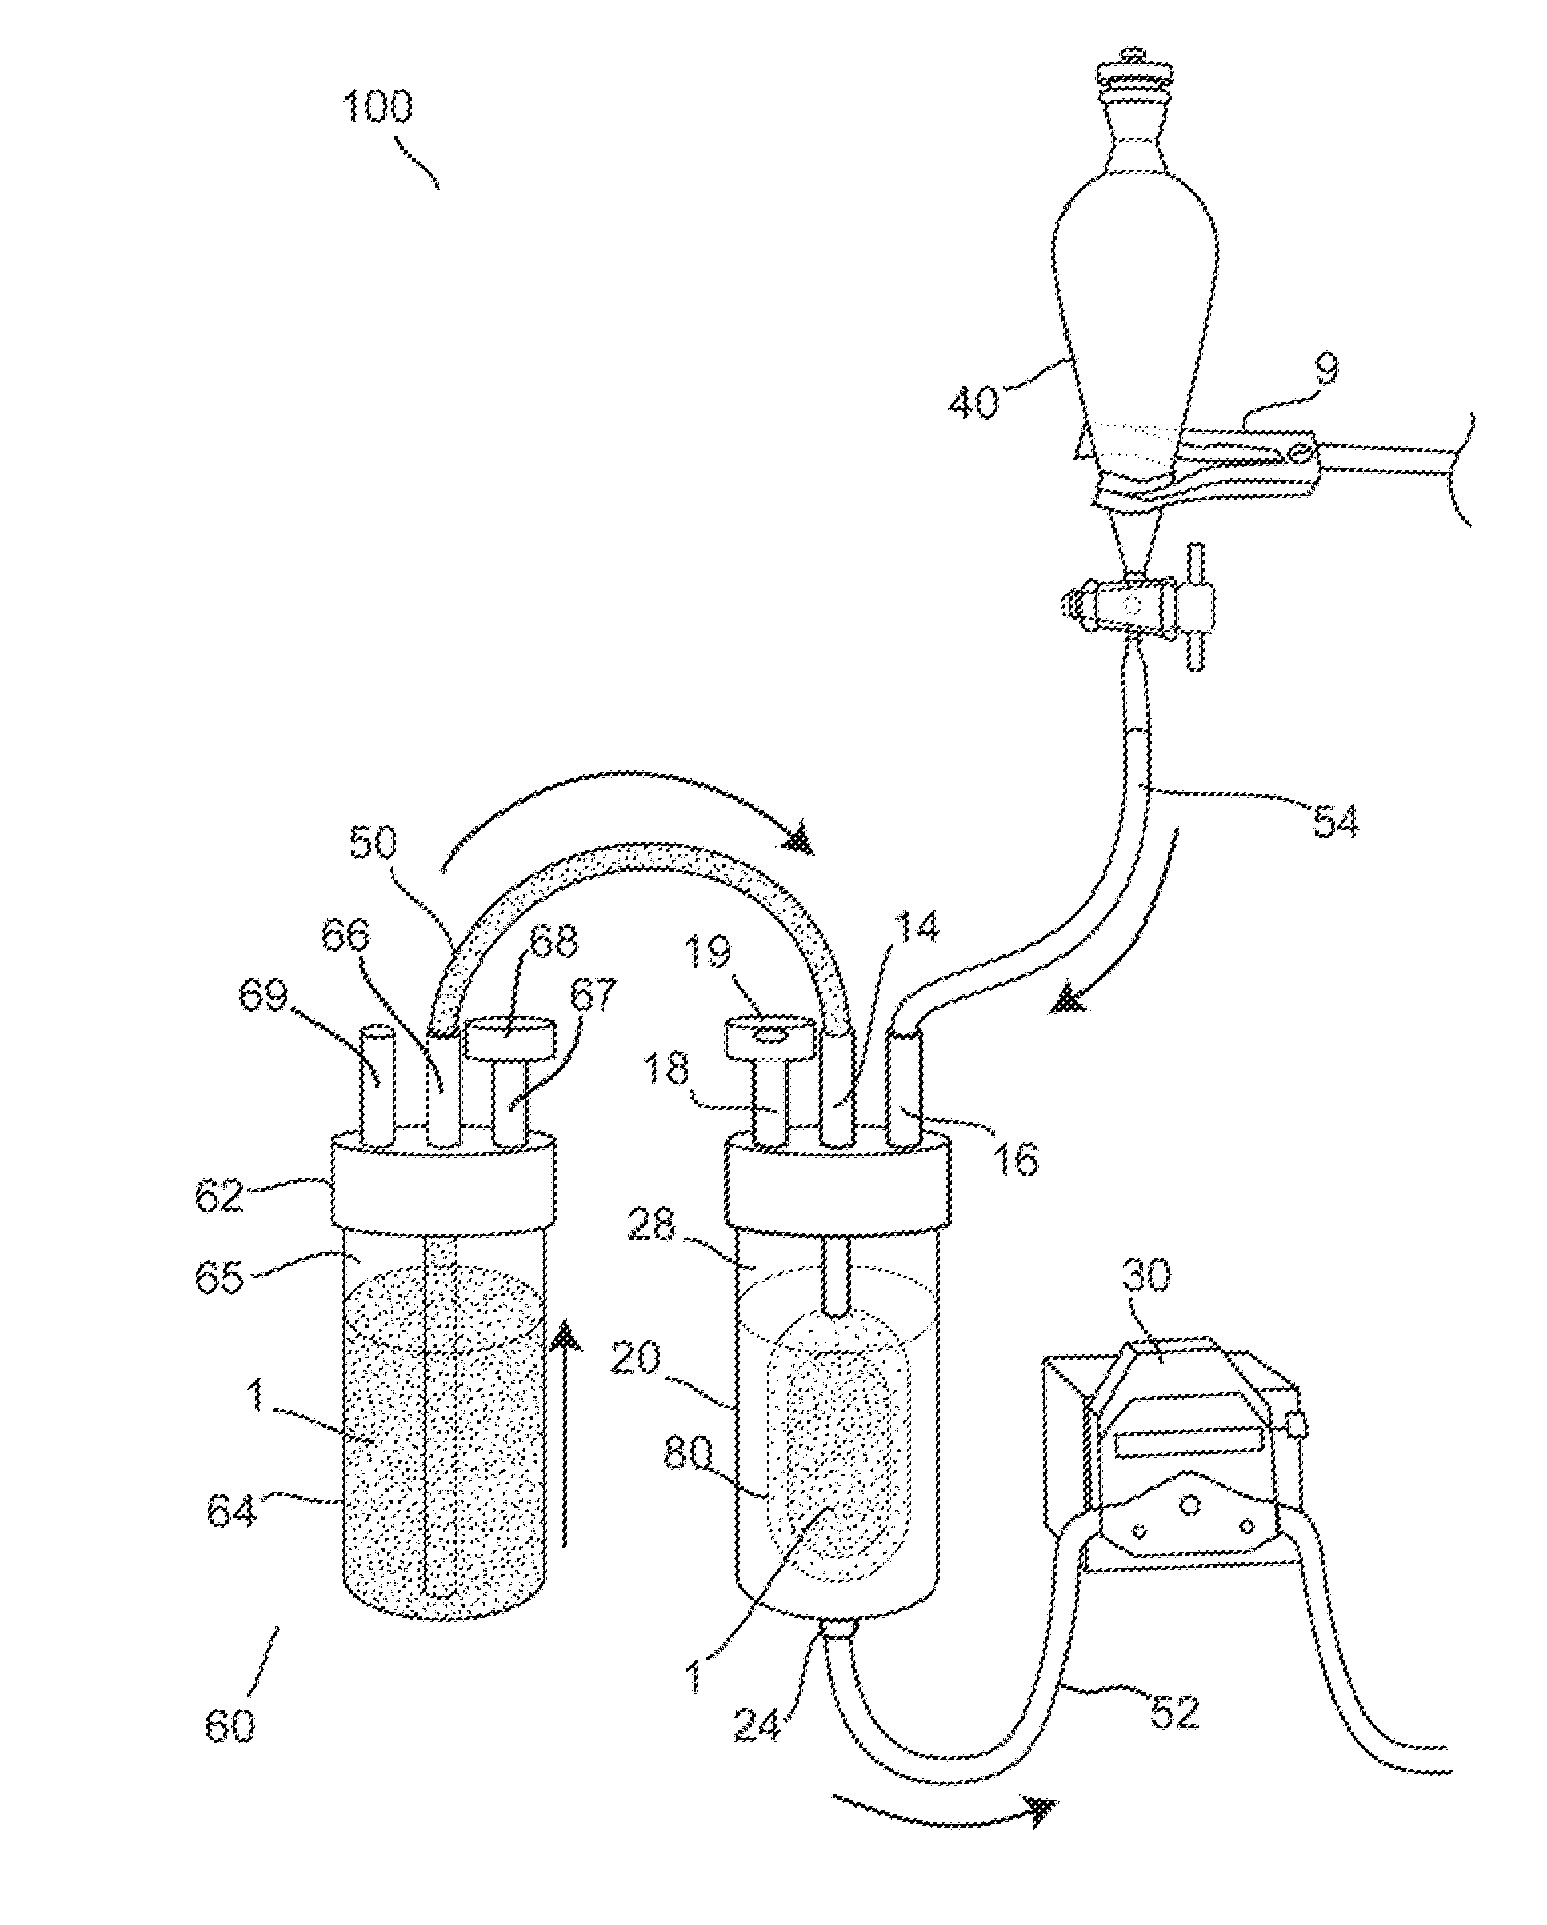 Loading system for an encapsulation device